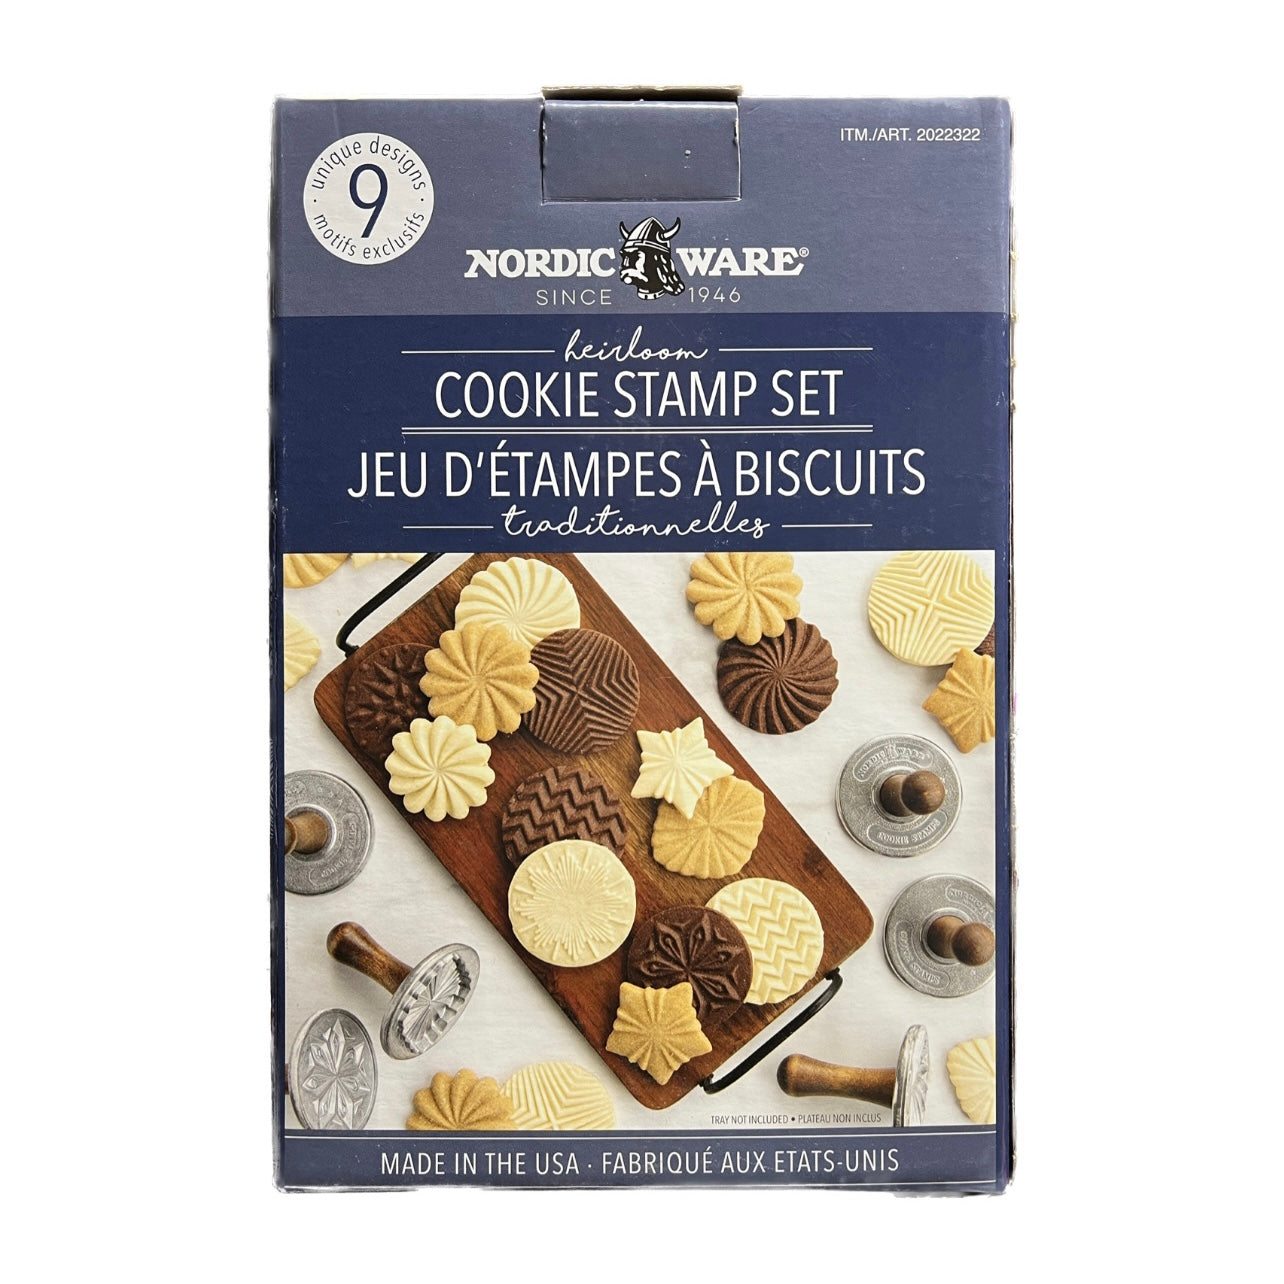 NORDIC-WARE-JEU-ÉTAMPES-BISCUITS-TRADITIONNELLES-COOKIE-STAMPS-2